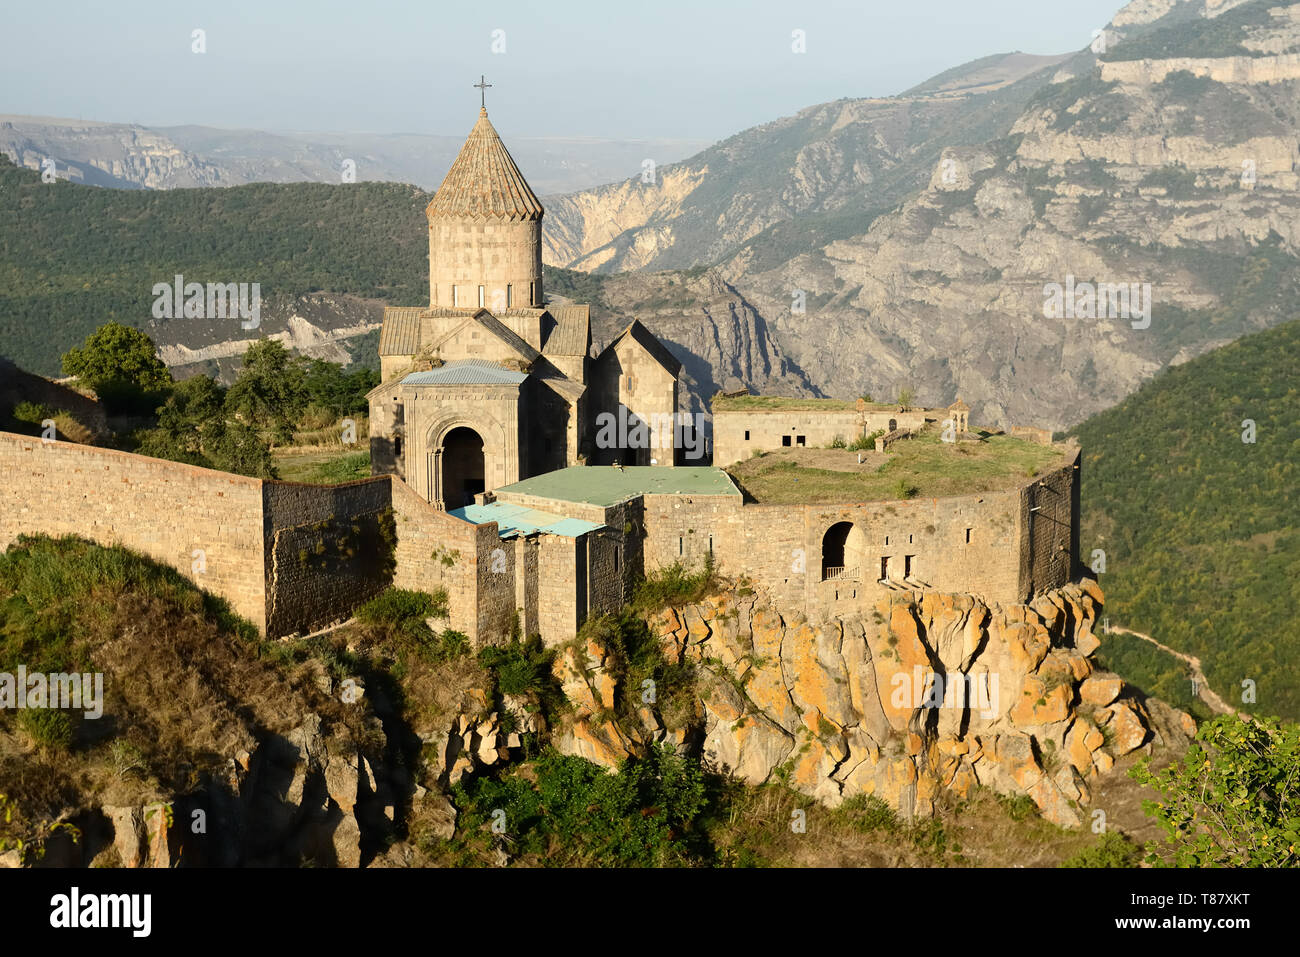 Tatev monastery is a 9th century. It is one of the oldest and most famous monastery complexes in Armenia. Stock Photo